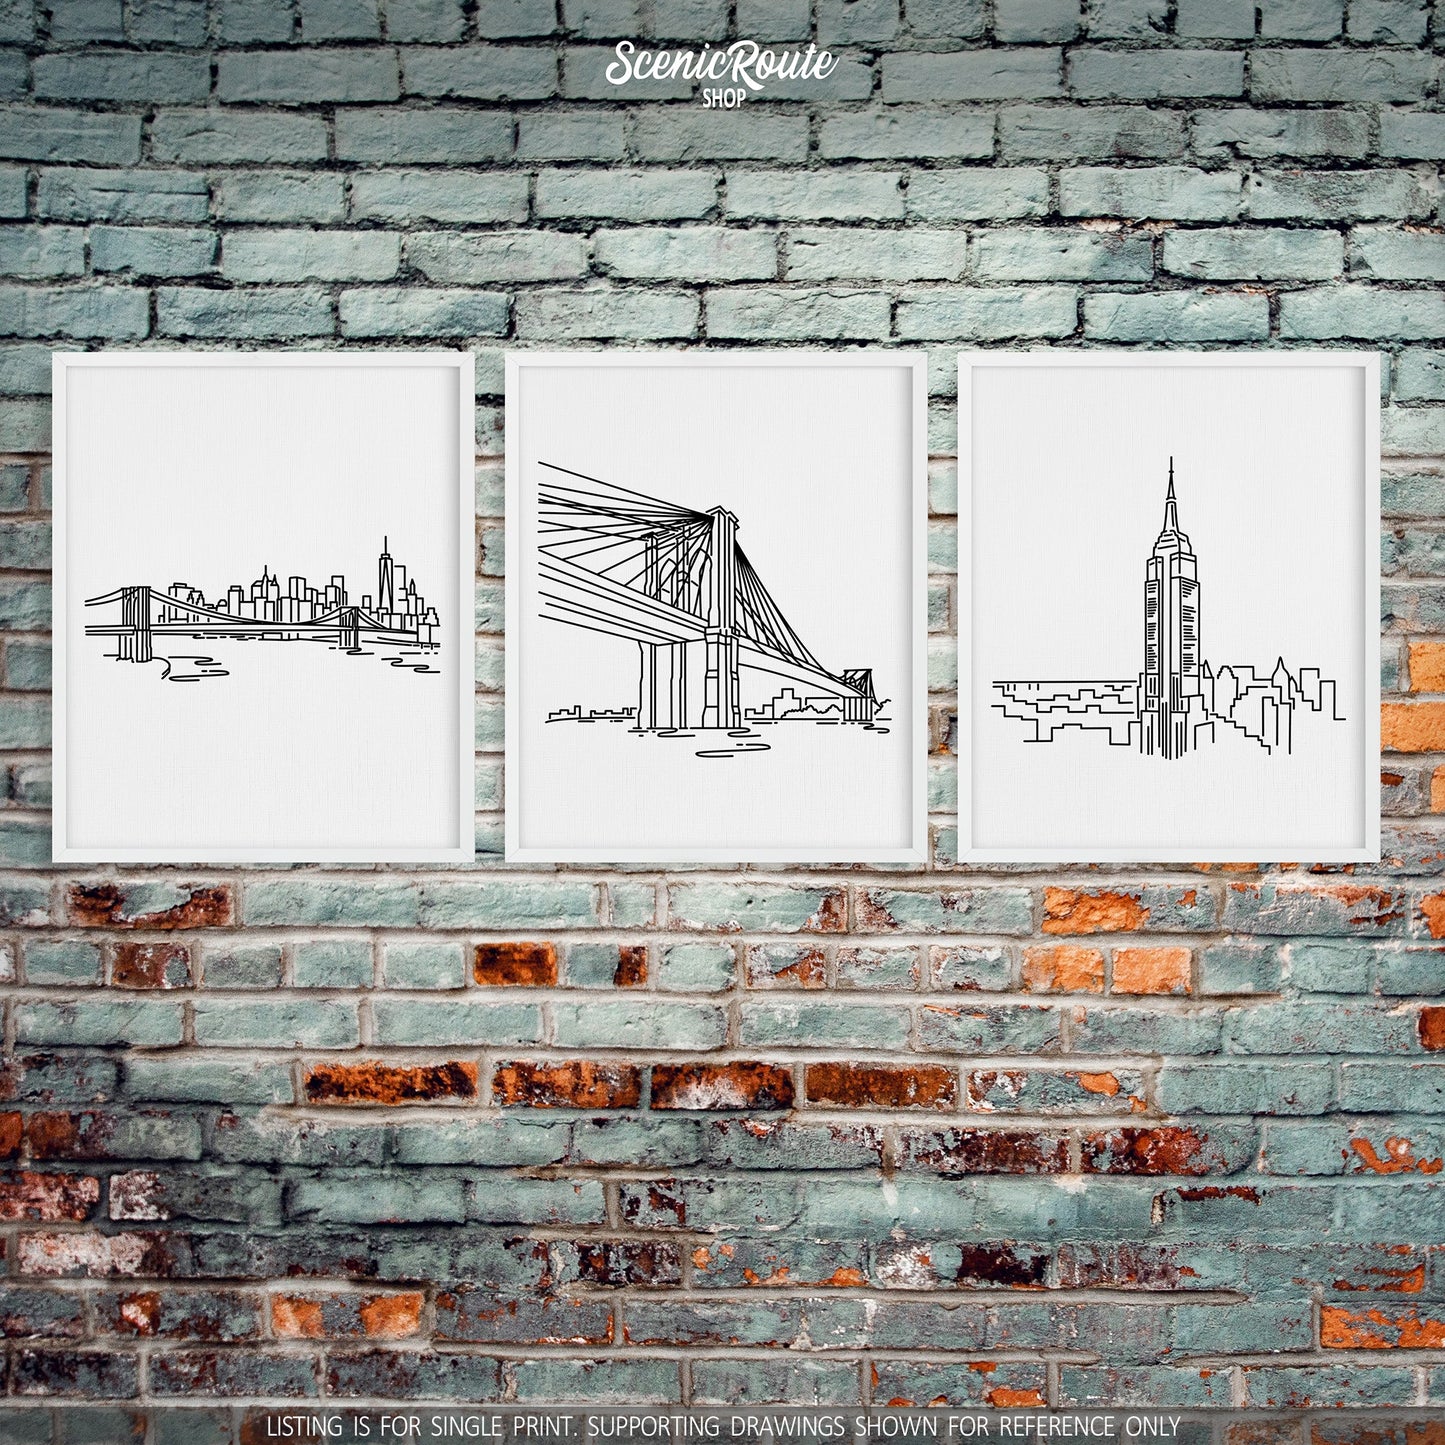 A group of three framed drawings on a brick wall. The line art drawings include the New York Skyline, Brooklyn Bridge, and Empire State Building